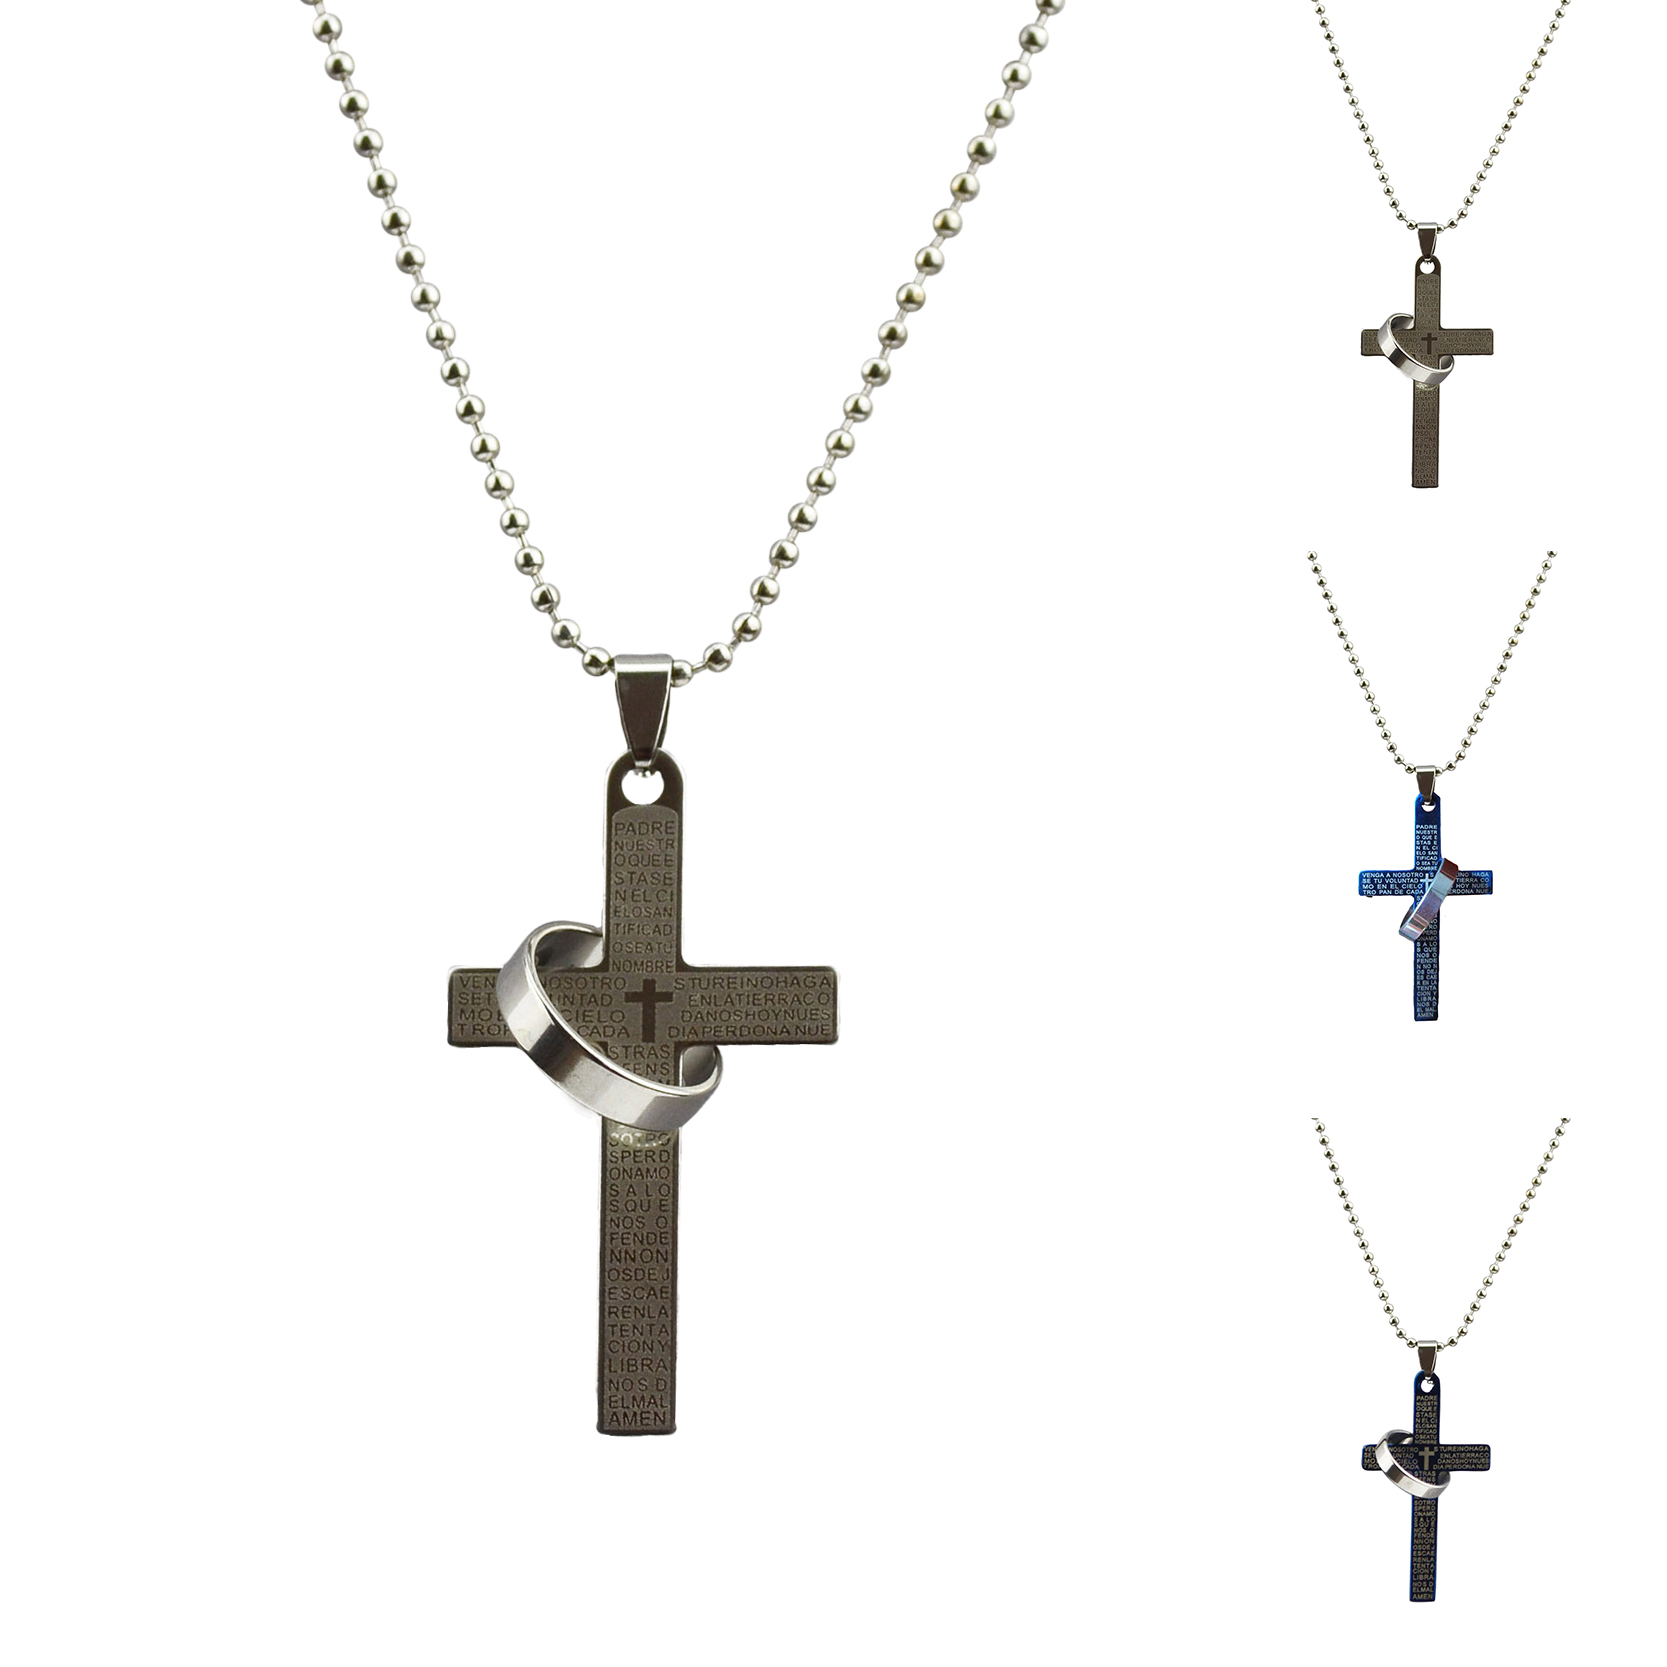 Fashion Cross Pendant Necklace Vintage Sterling Silver Statement Chain Necklace in Jewelry for Men Women 2015